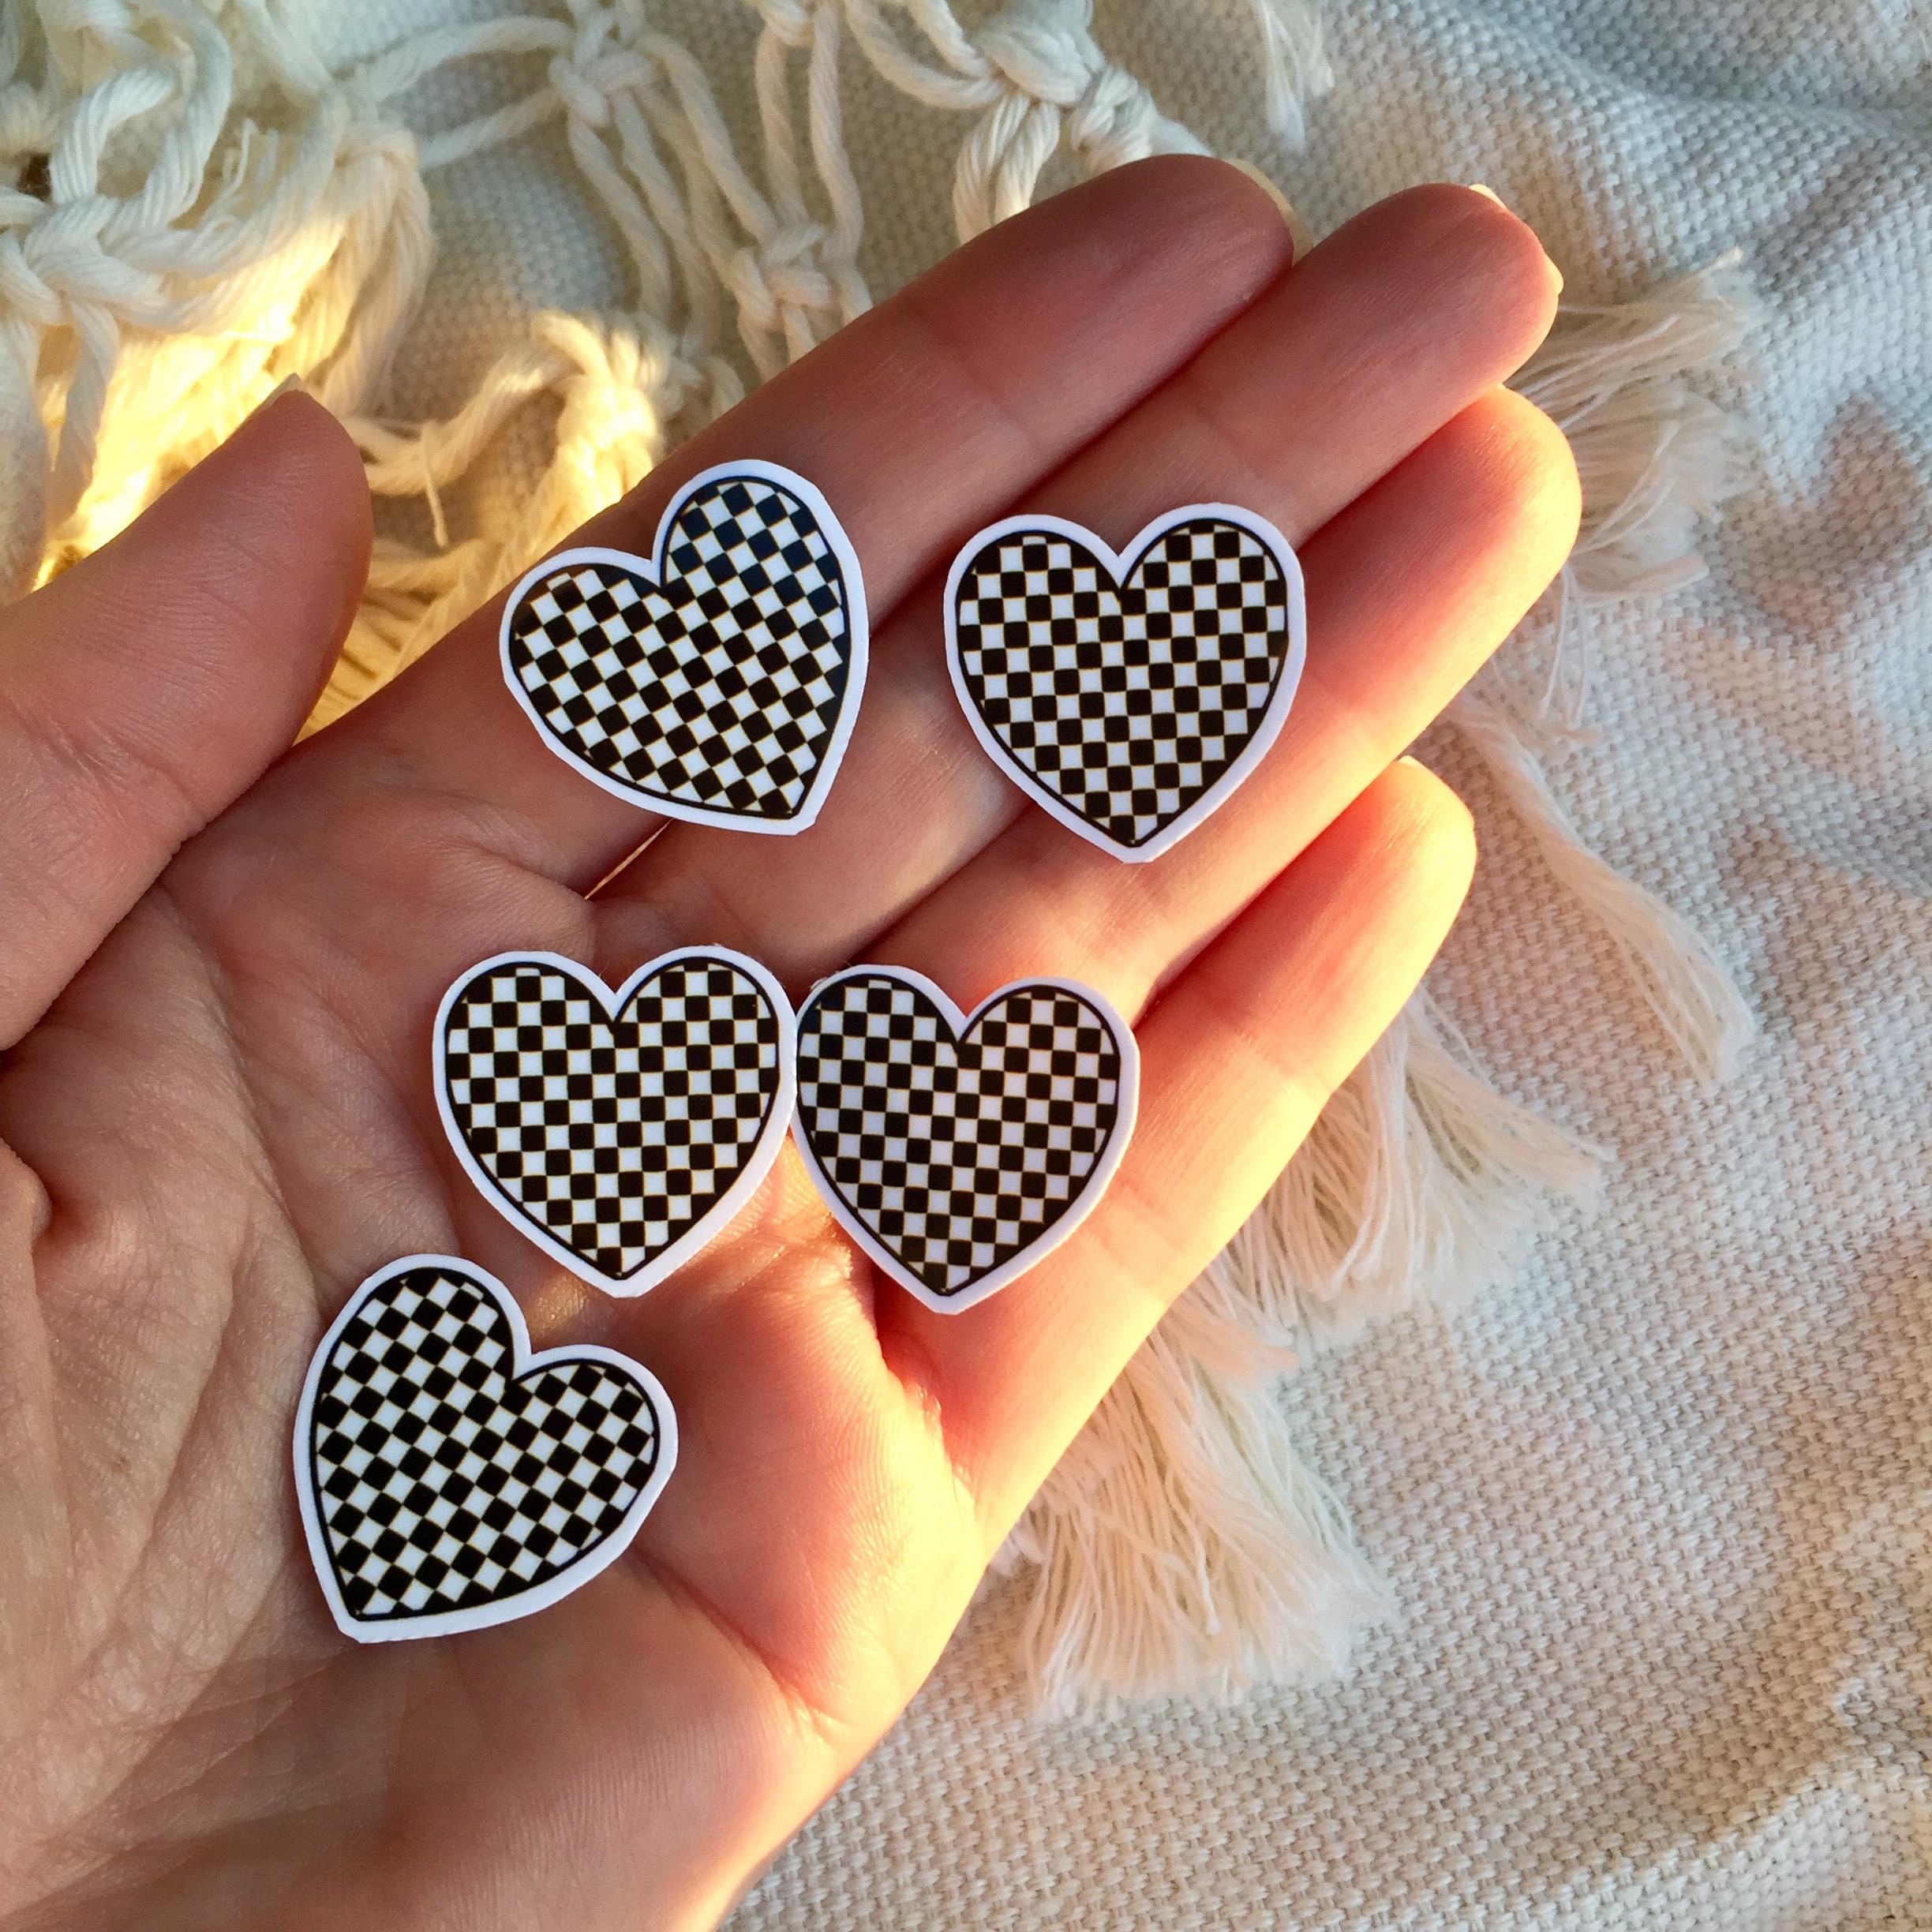 Mini Pack - One Inch Vinyl Heart Stickers  Peel and Stick – Polka Dot Wall  Stickers